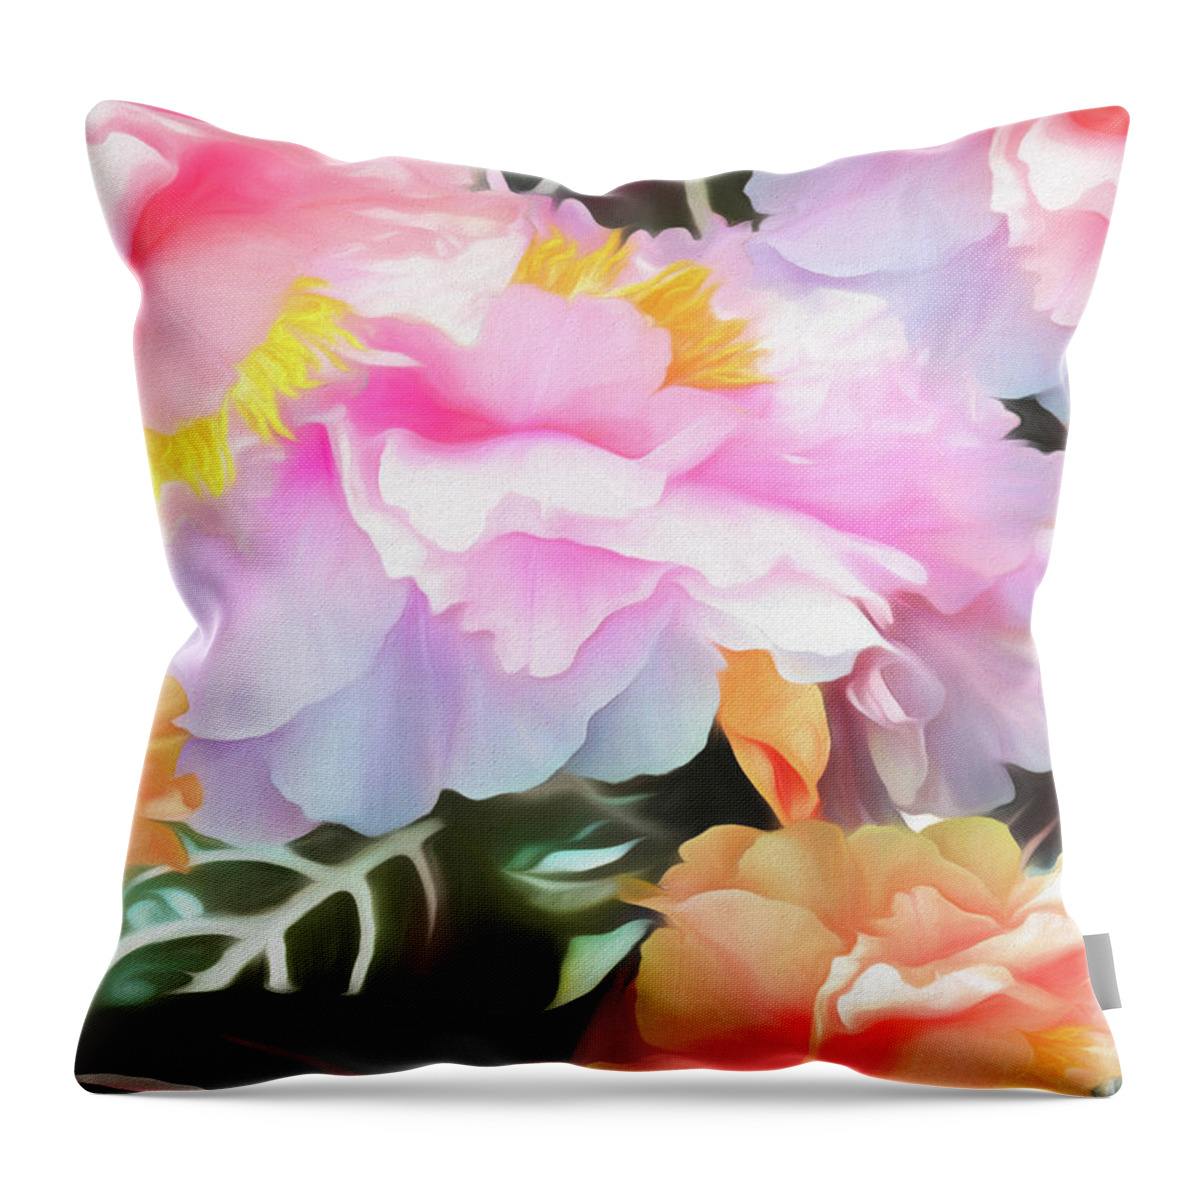 Flowers Throw Pillow featuring the mixed media Peonies on Zebra Leaves Soft by Lynda Lehmann